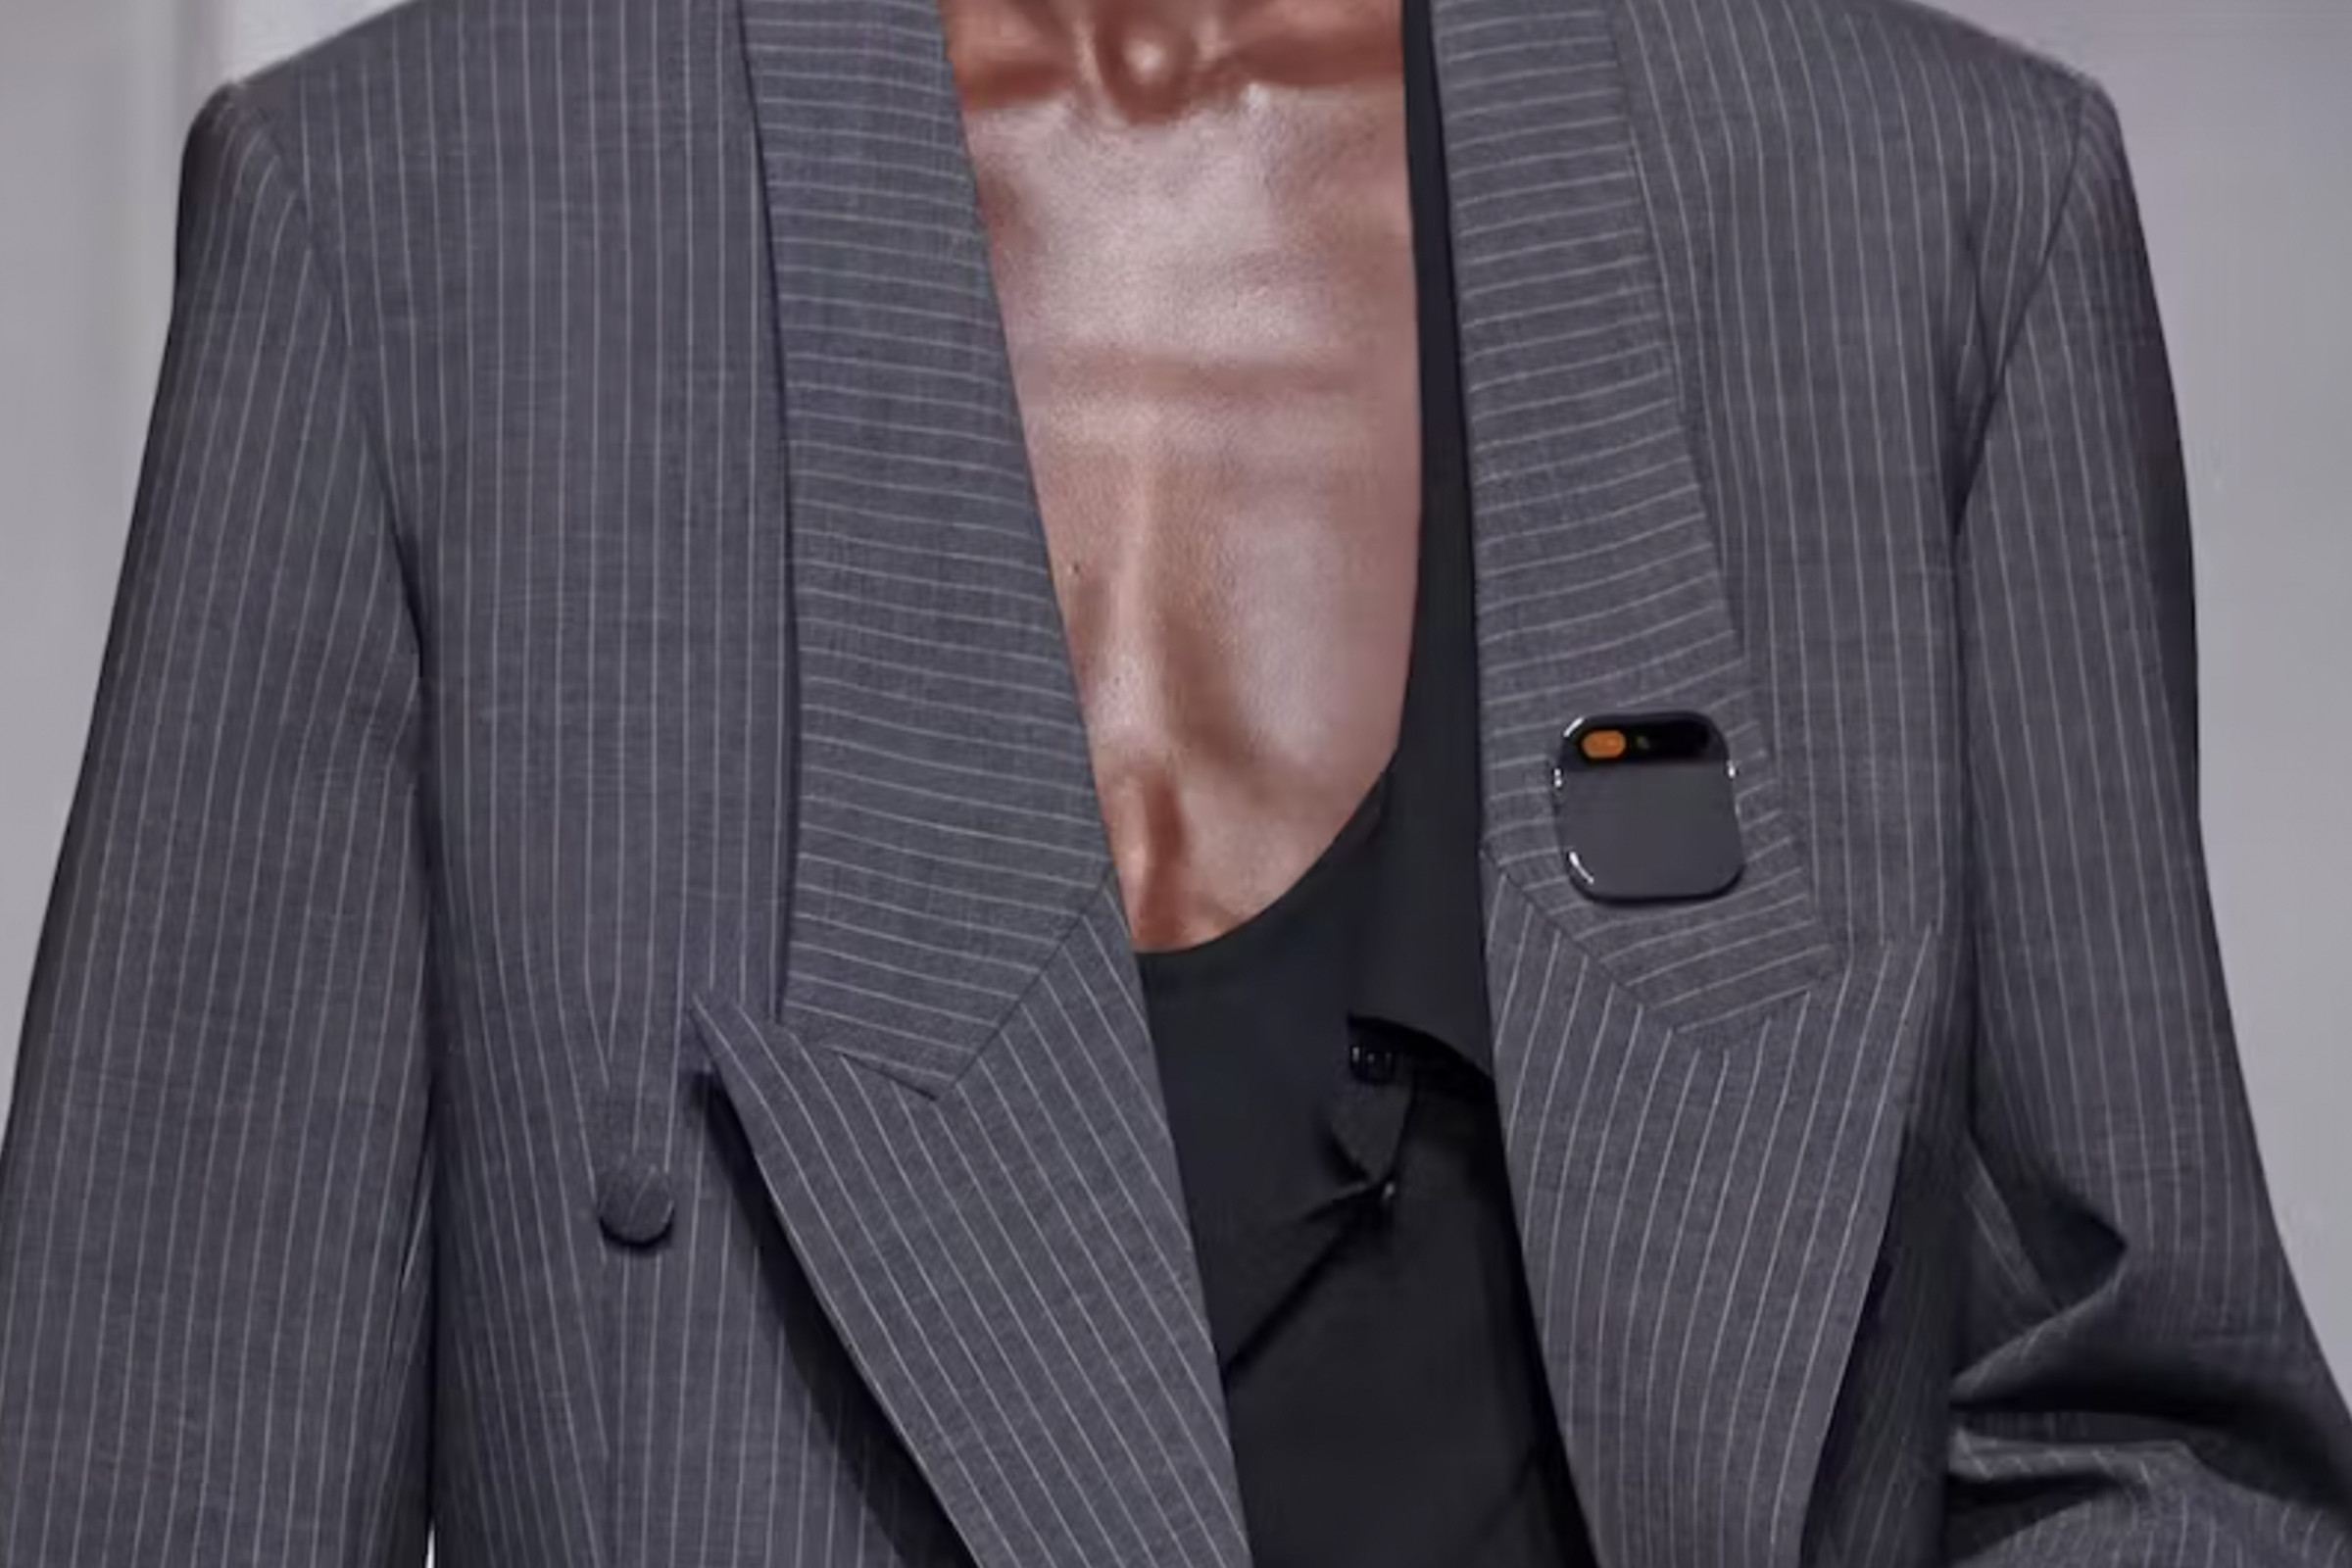 A photo showing Humane’s AI pin attached to a model’s suit during a fashion show.